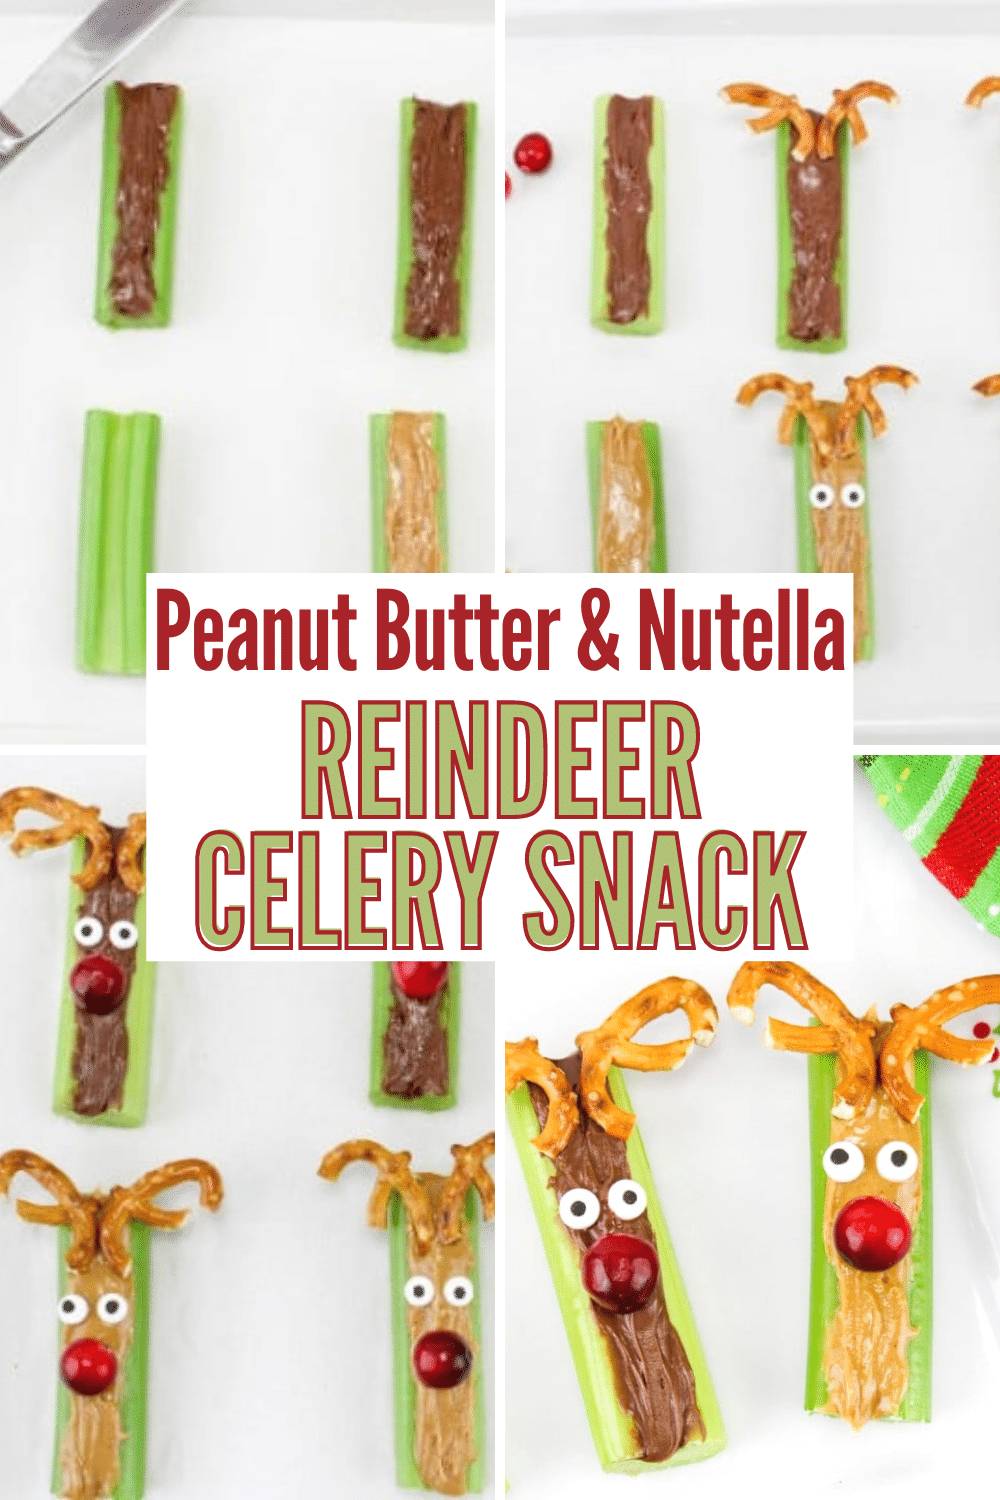 These Celery Reindeer Snacks are so cute and really easy to make. They're the perfect snack for kids during the holiday season. #Christmas #reindeer #funfood #snacks via @wondermomwannab